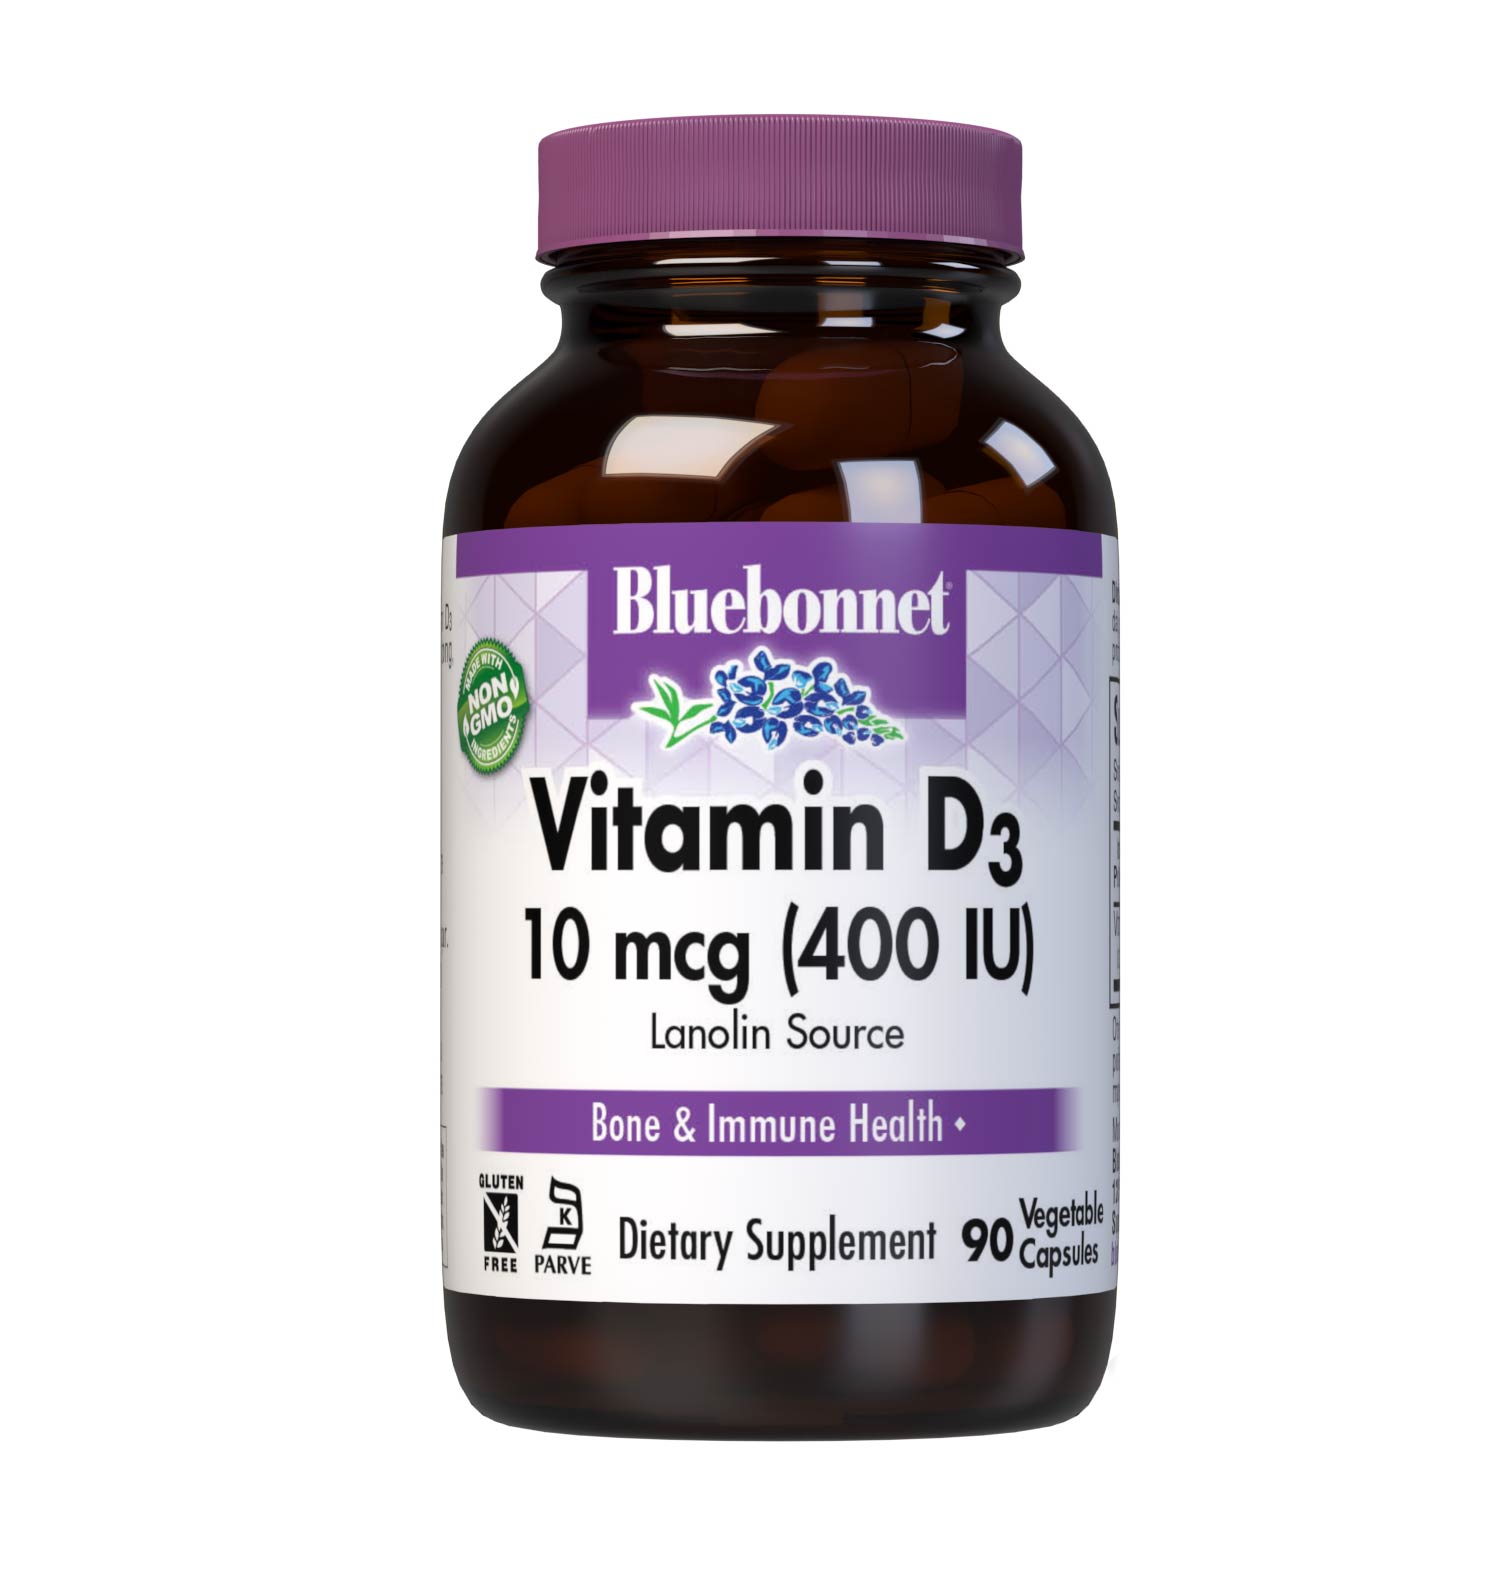 Bluebonnet’s Vitamin D3 10 mcg (400 IU) 90 Vegetable Capsules are formulated with vitamin D3 (cholecalciferol) from lanolin to help support strong, healthy bones and immune function. #size_90 count